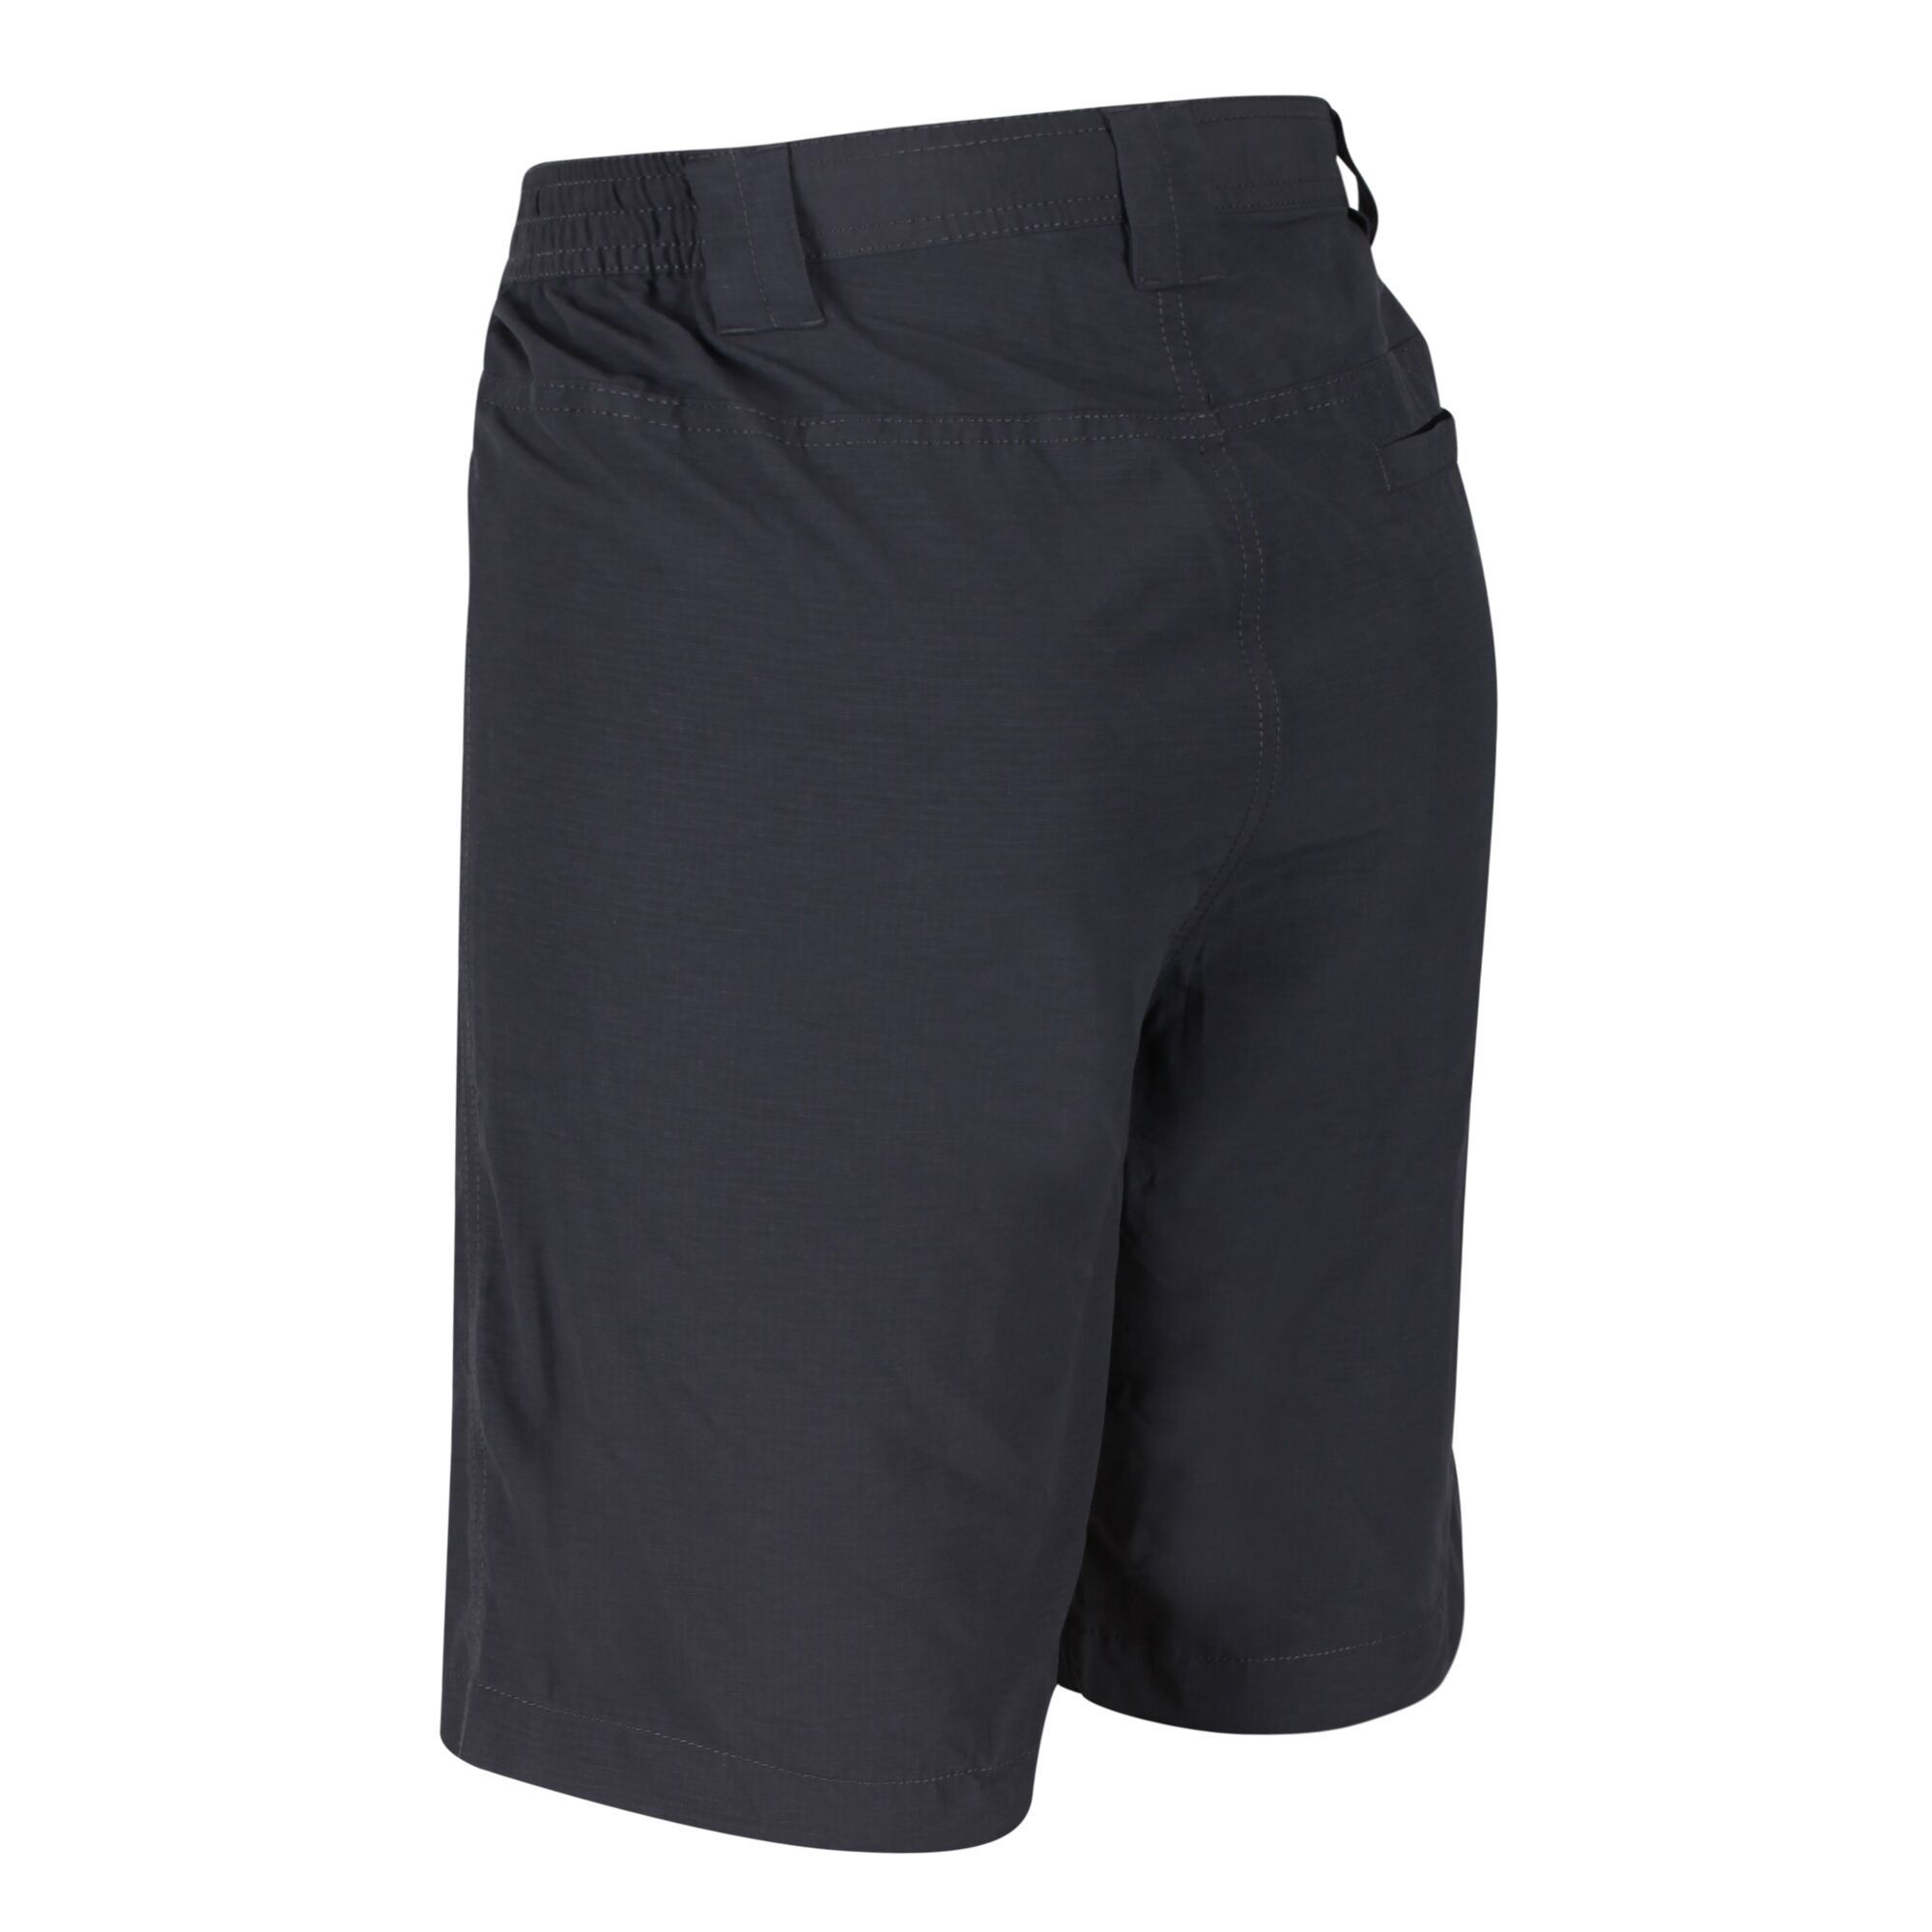 Material: 70% cotton coolweave & 30% polyester ripstop fabric. Part elasticated waist. Multi pocketed.